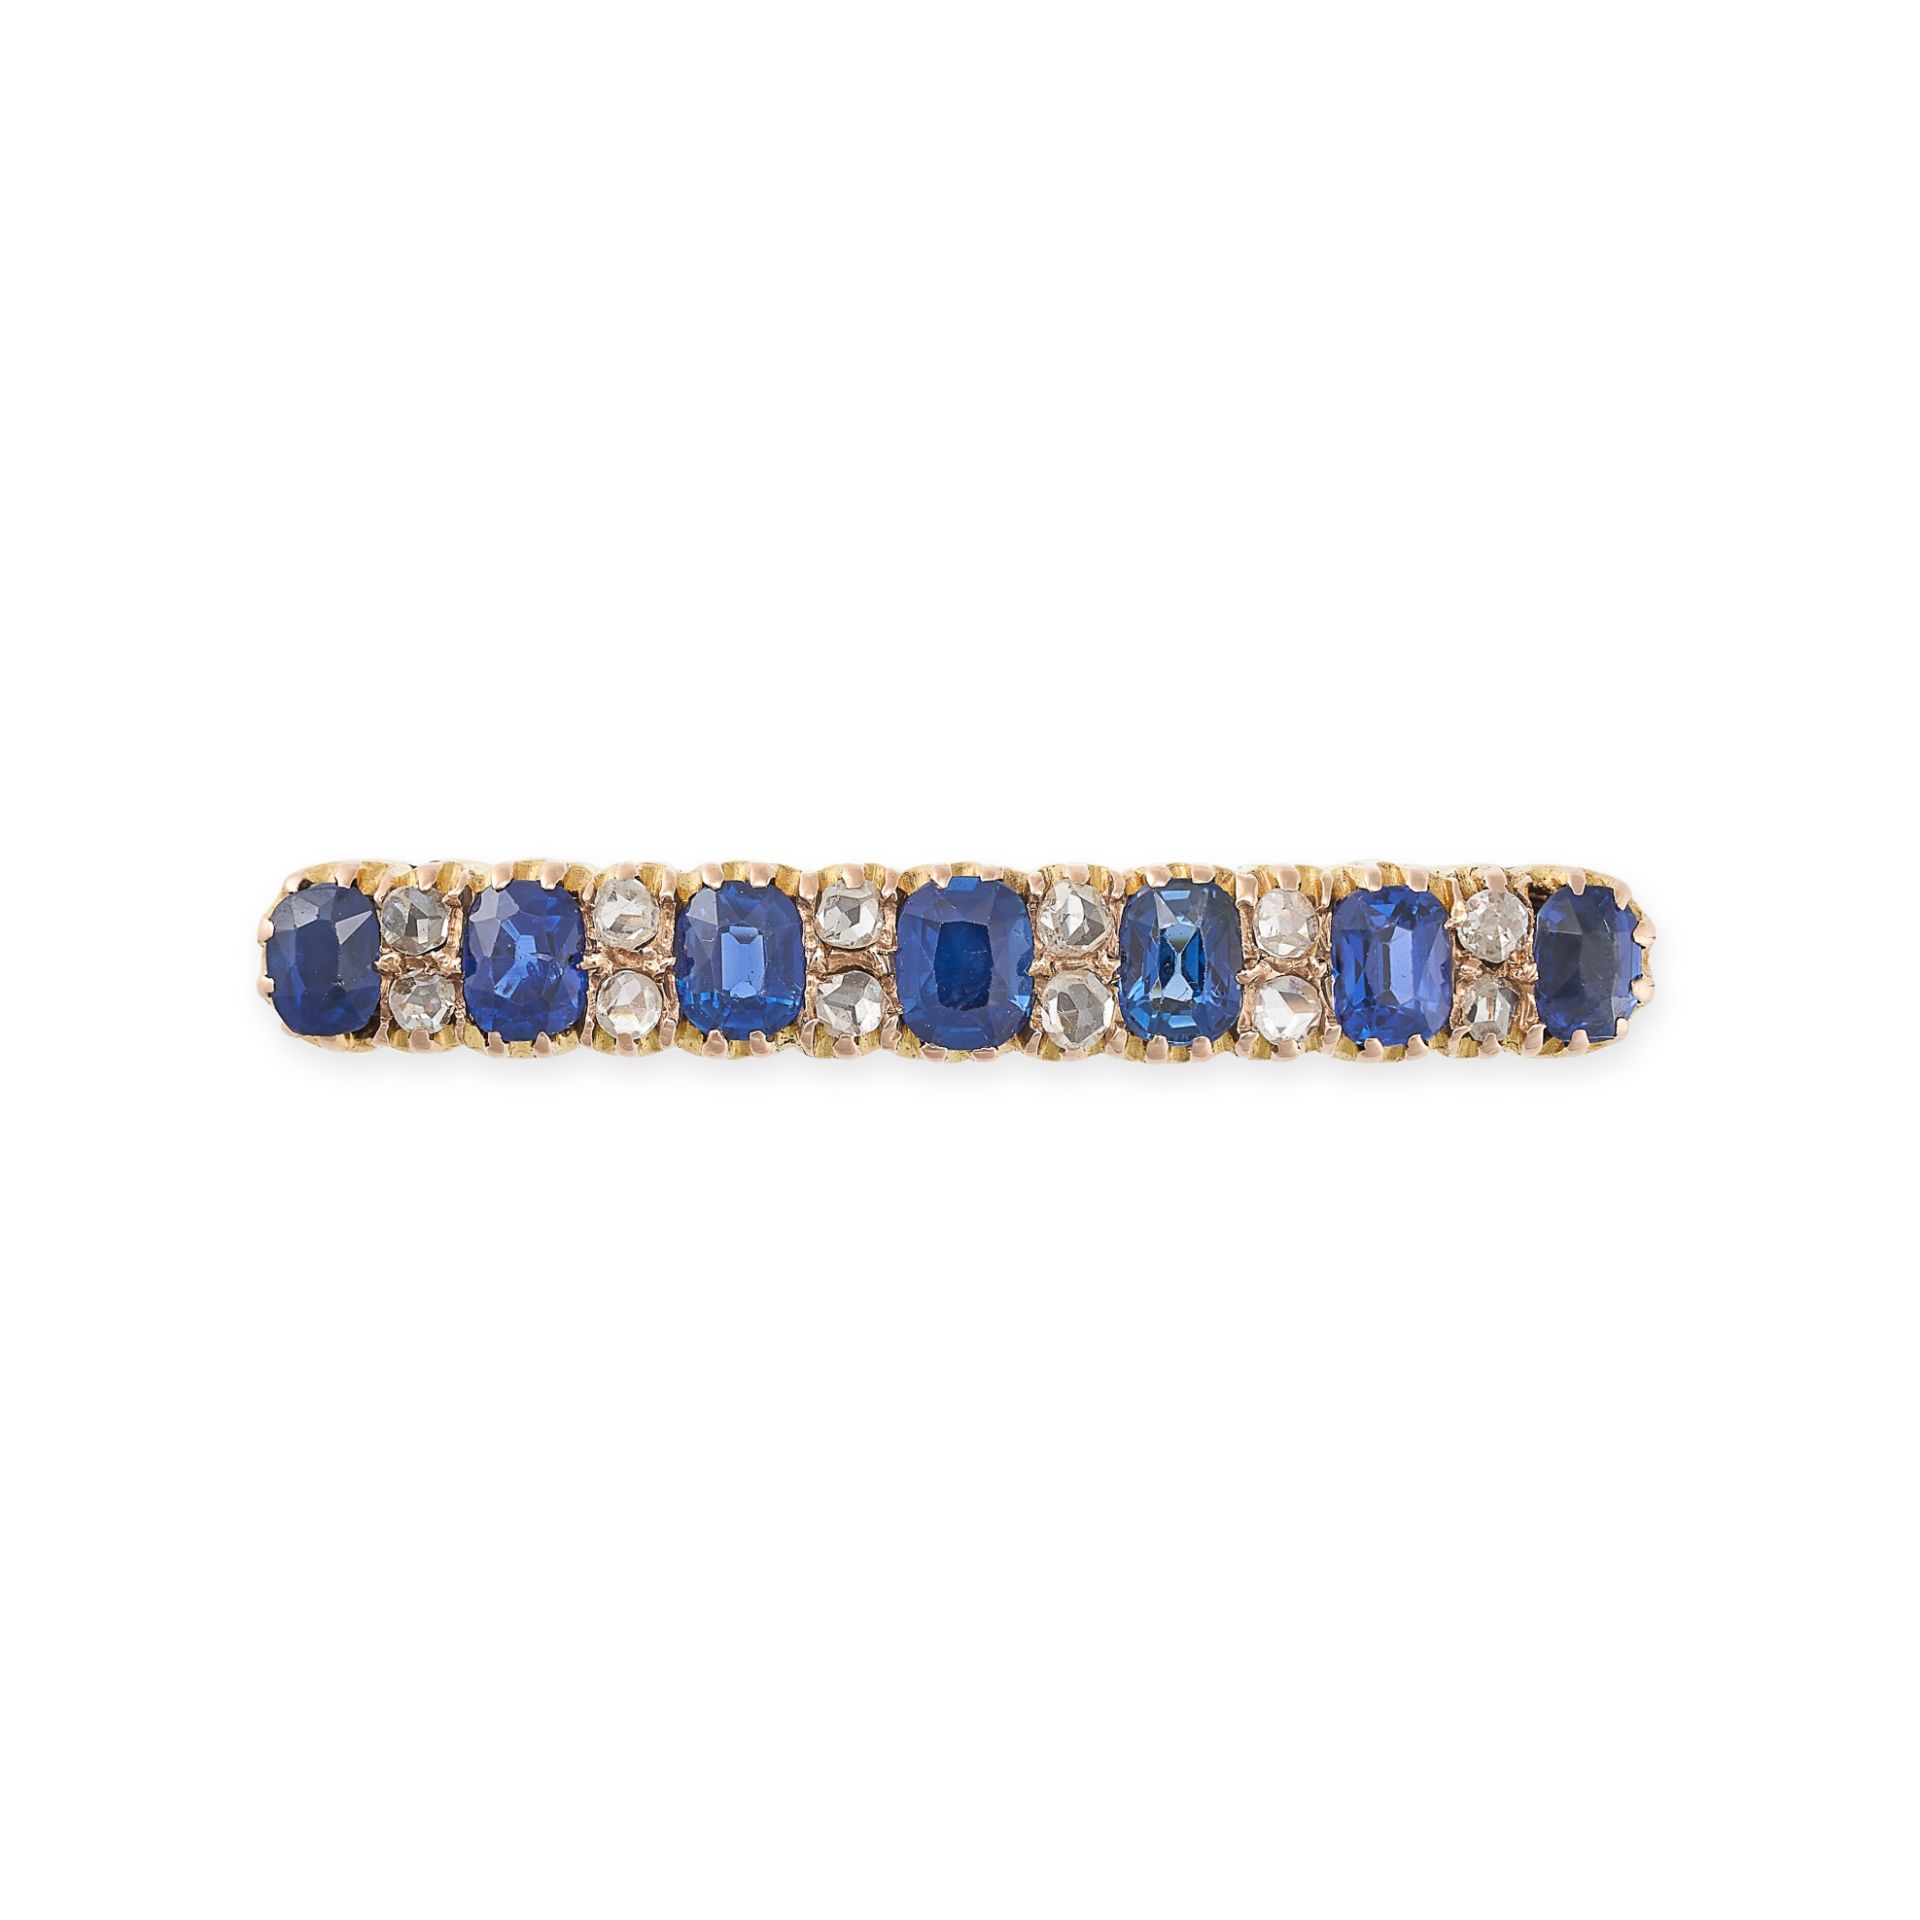 AN ANTIQUE SAPPHIRE AND DIAMOND BAR BROOCH in yellow gold, set with seven cushion cut sapphires a...